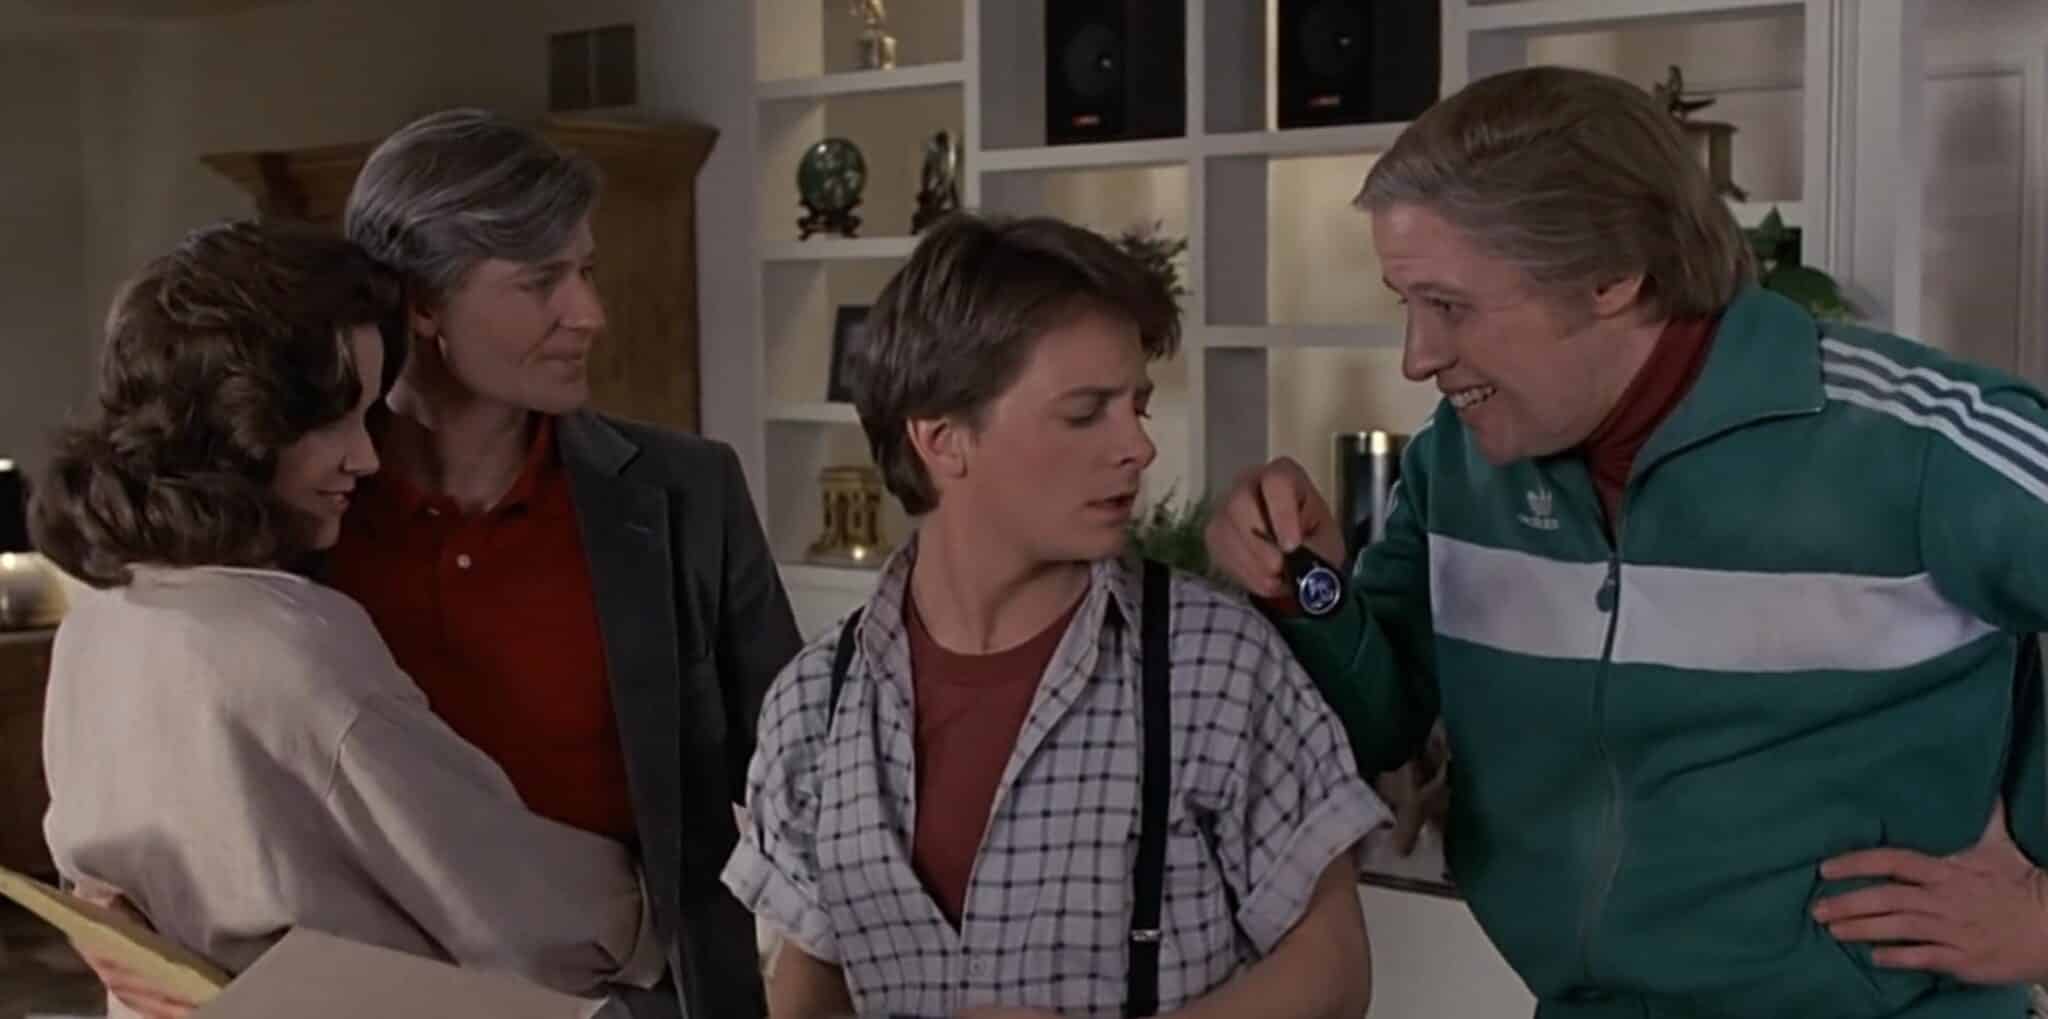 Michael J. Fox, Crispin Glover, Lea Thompson, and Tom Wilson in Back to the Future (1985)